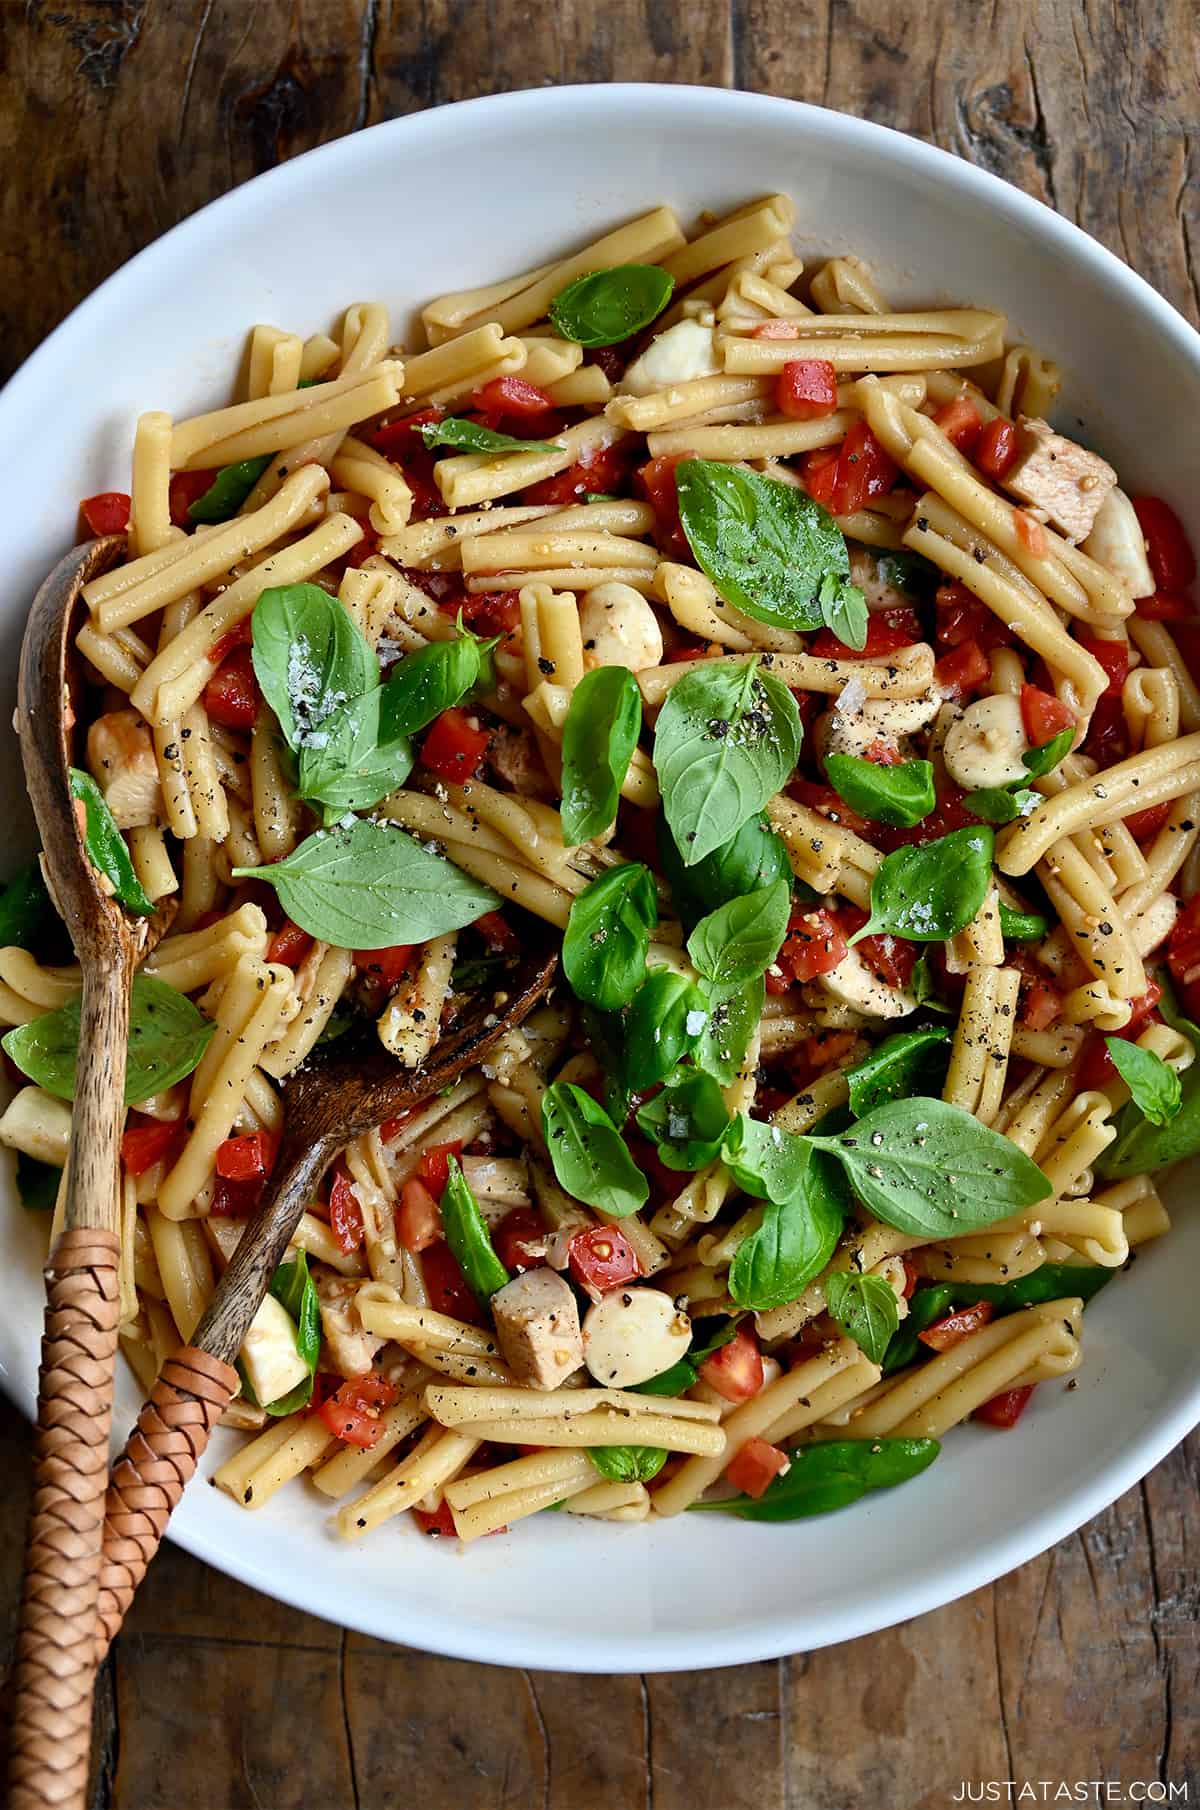 A top-down view of a large serving bowl containing Caprese pasta salad garnished with fresh basil leaves.